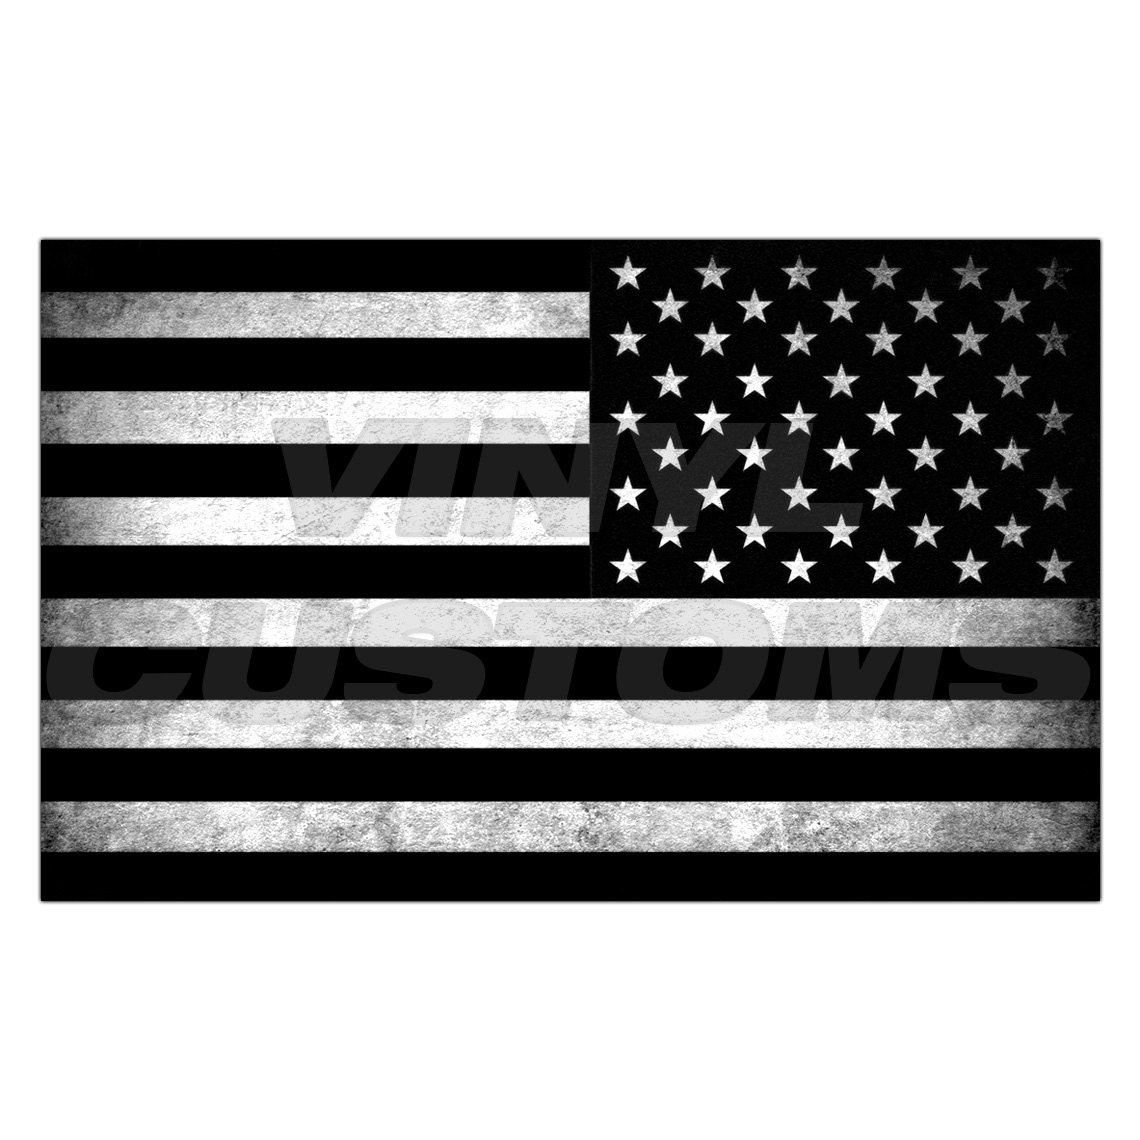 2-5" Subdued Tactical American Flags Reflective Decals Stickers F+R 